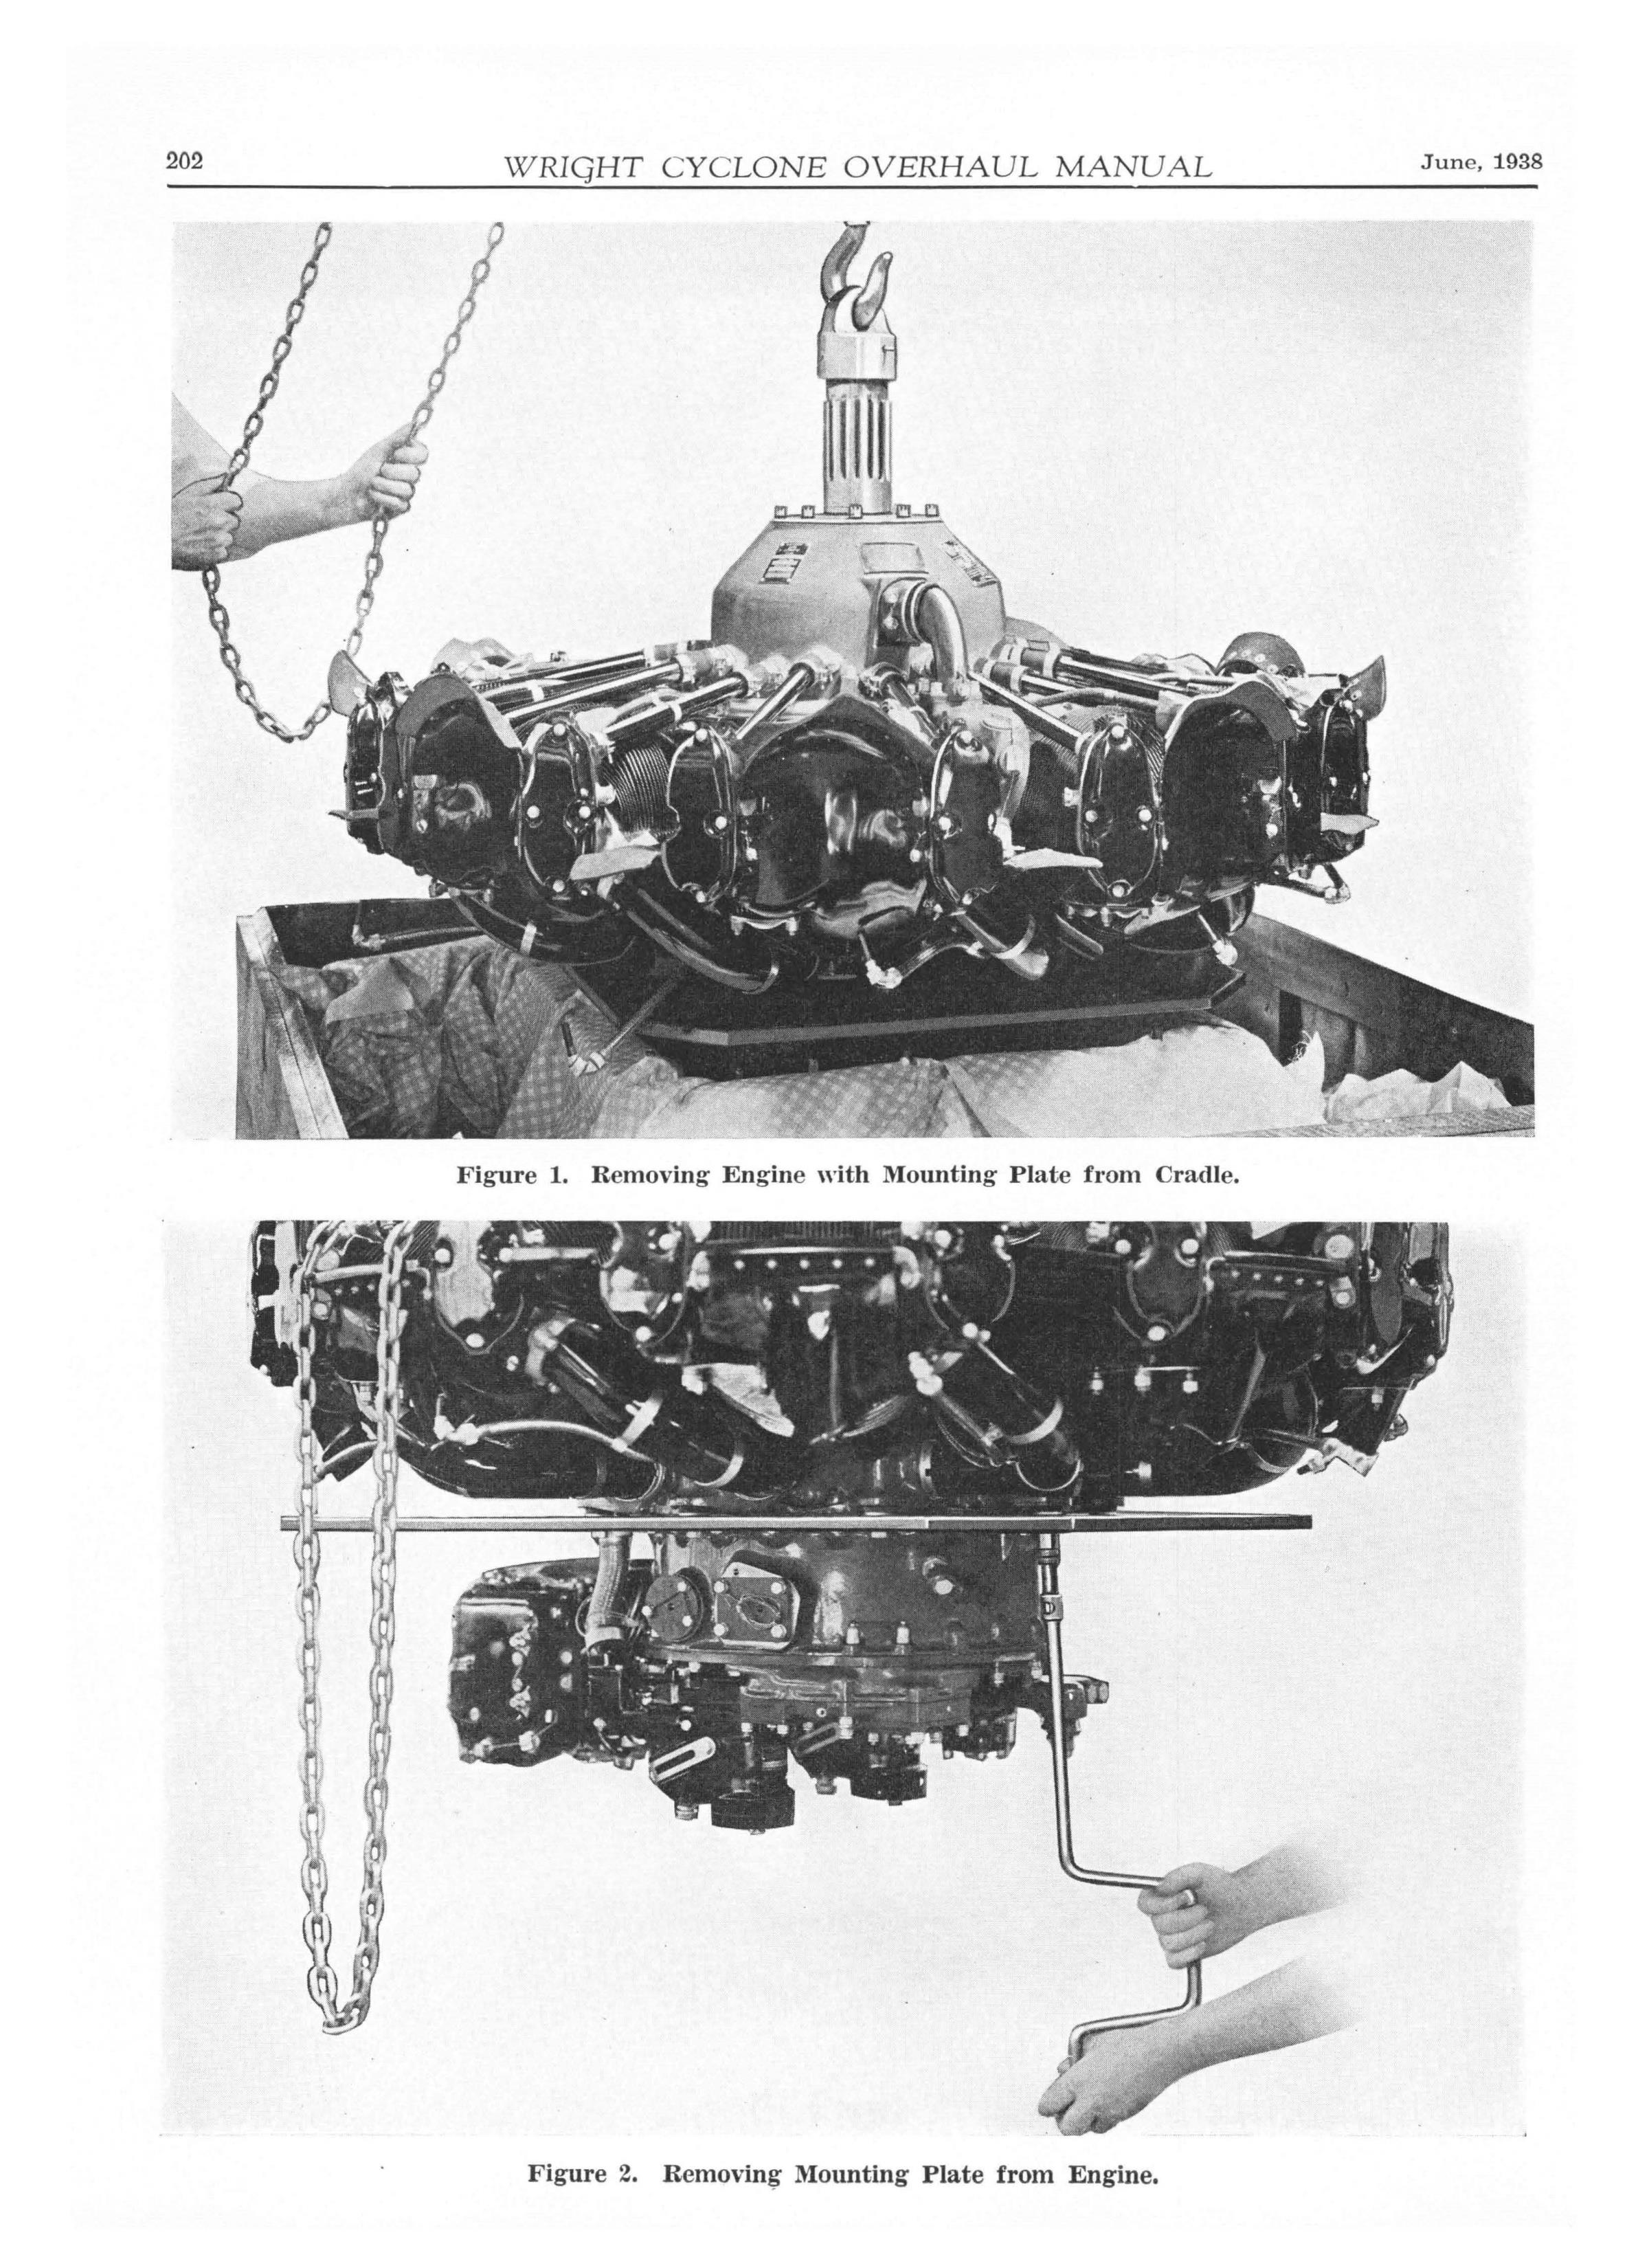 Sample page 22 from AirCorps Library document: Overhaul Manual for Wright Cyclone Engine Direct and Geared Drives